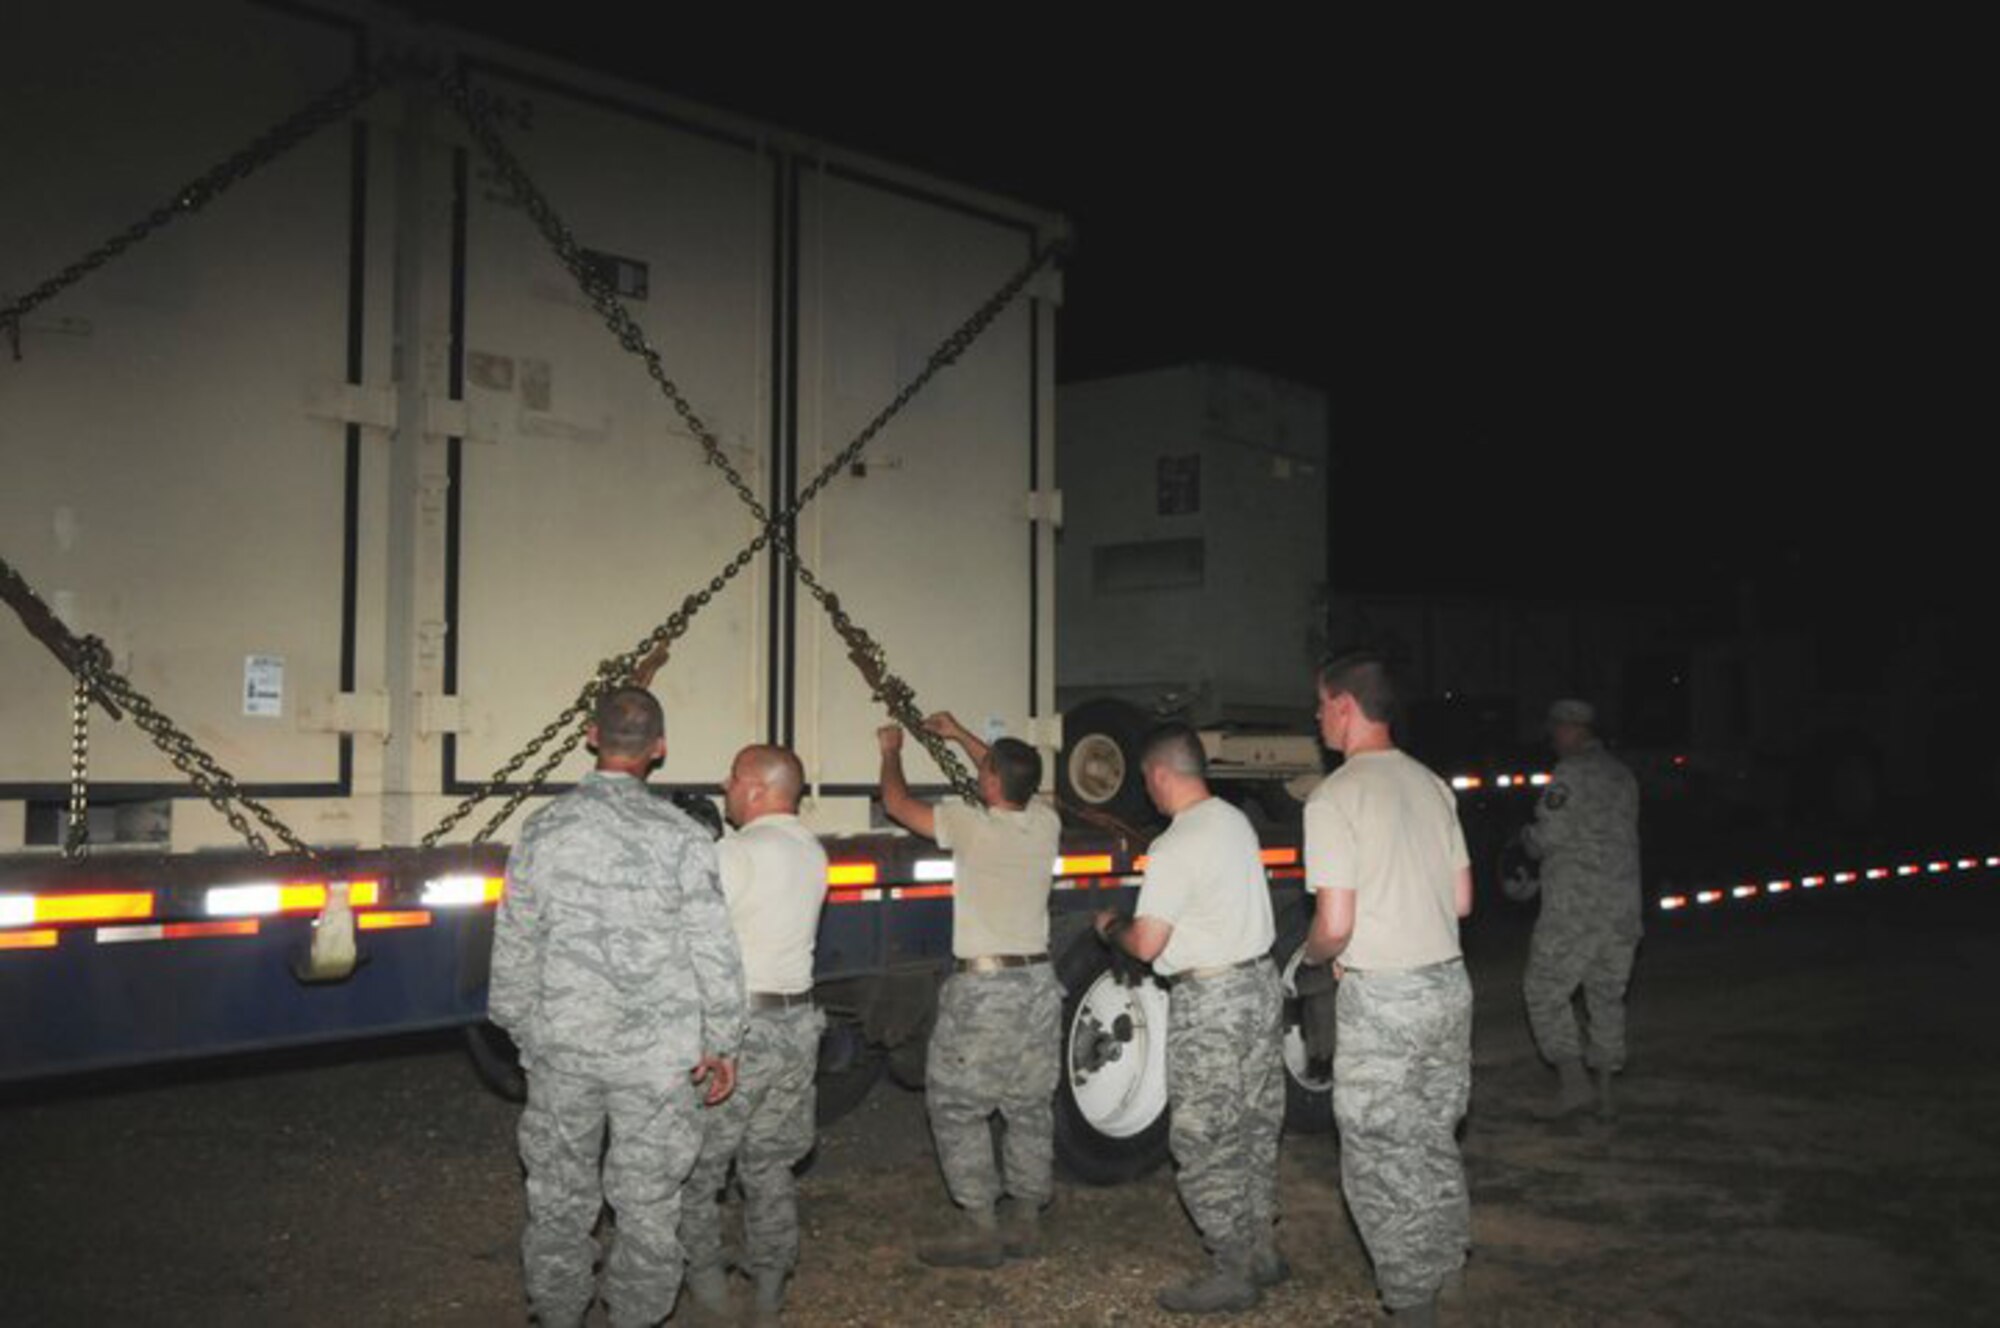 Airmen from the 188th Fighter Wing's Civil Engineering Squadron at Fort Smith release chains holding shipping containers for the Disaster Relief Bed-down System (DRBS) at McGehee, Ark., May 11, 2011. The Airmen were part of an advance team for the Arkansas National Guard deploying to the southeast region of the state. The DRBS is a self-contained support facility for disaster response teams. The facility can house, feed and provide shower and laundry services for up to 150 Guardsmen. (Photo by Staff Sgt. Julian Johnson, Arkansas National Guard Public Affairs.)